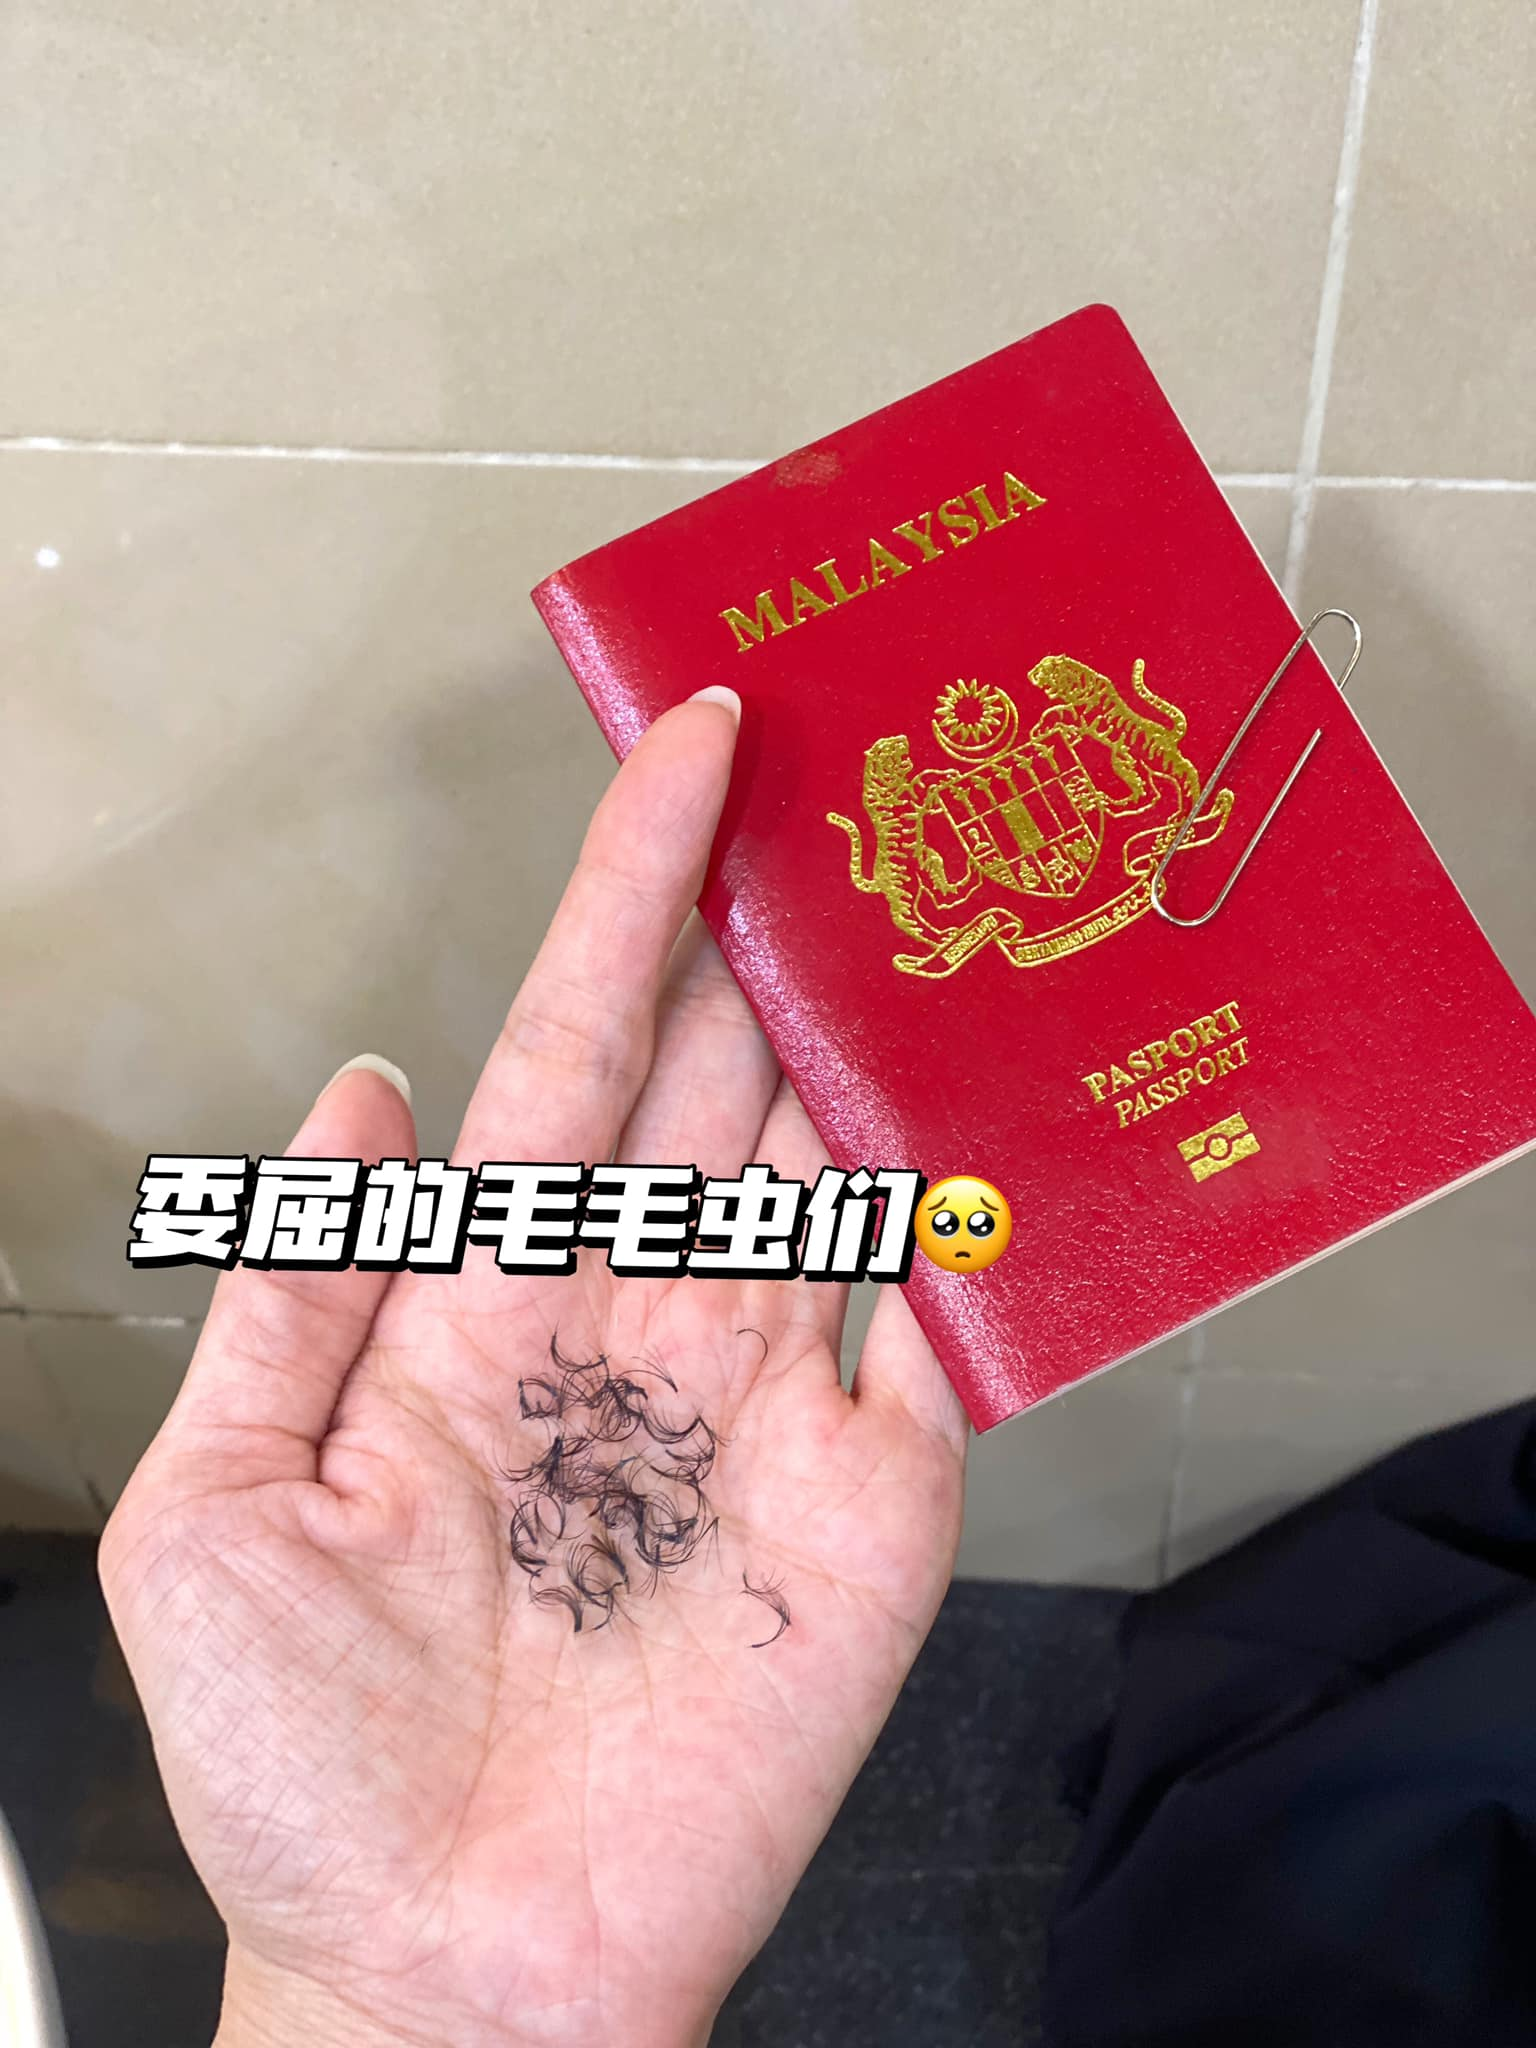 Johor woman forced to pull out eyelash extensions inside toilet to take passport photo